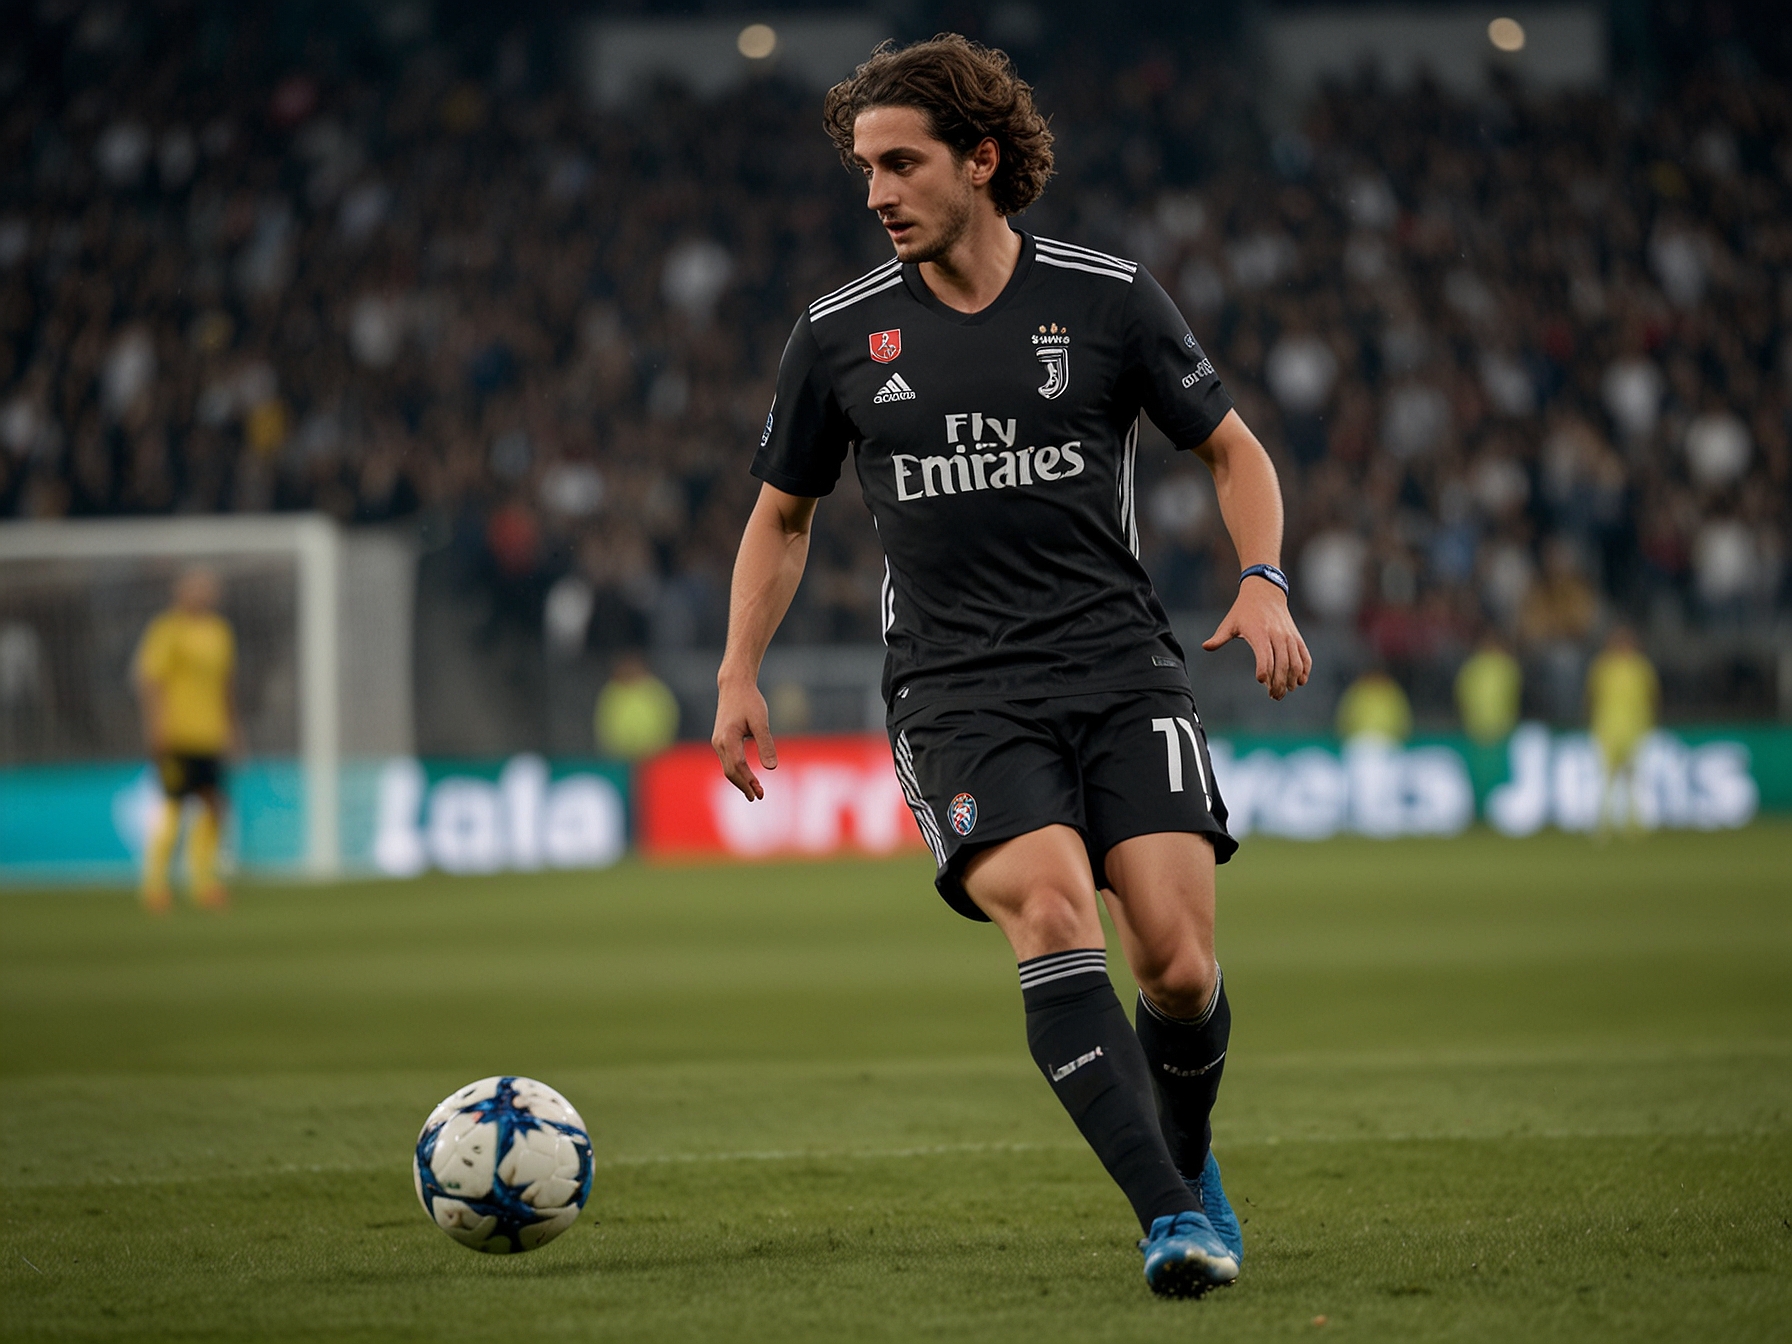 Adrien Rabiot in action for Juventus, showcasing his versatility and control in midfield, a key aspect that has attracted interest from top clubs including Manchester United.